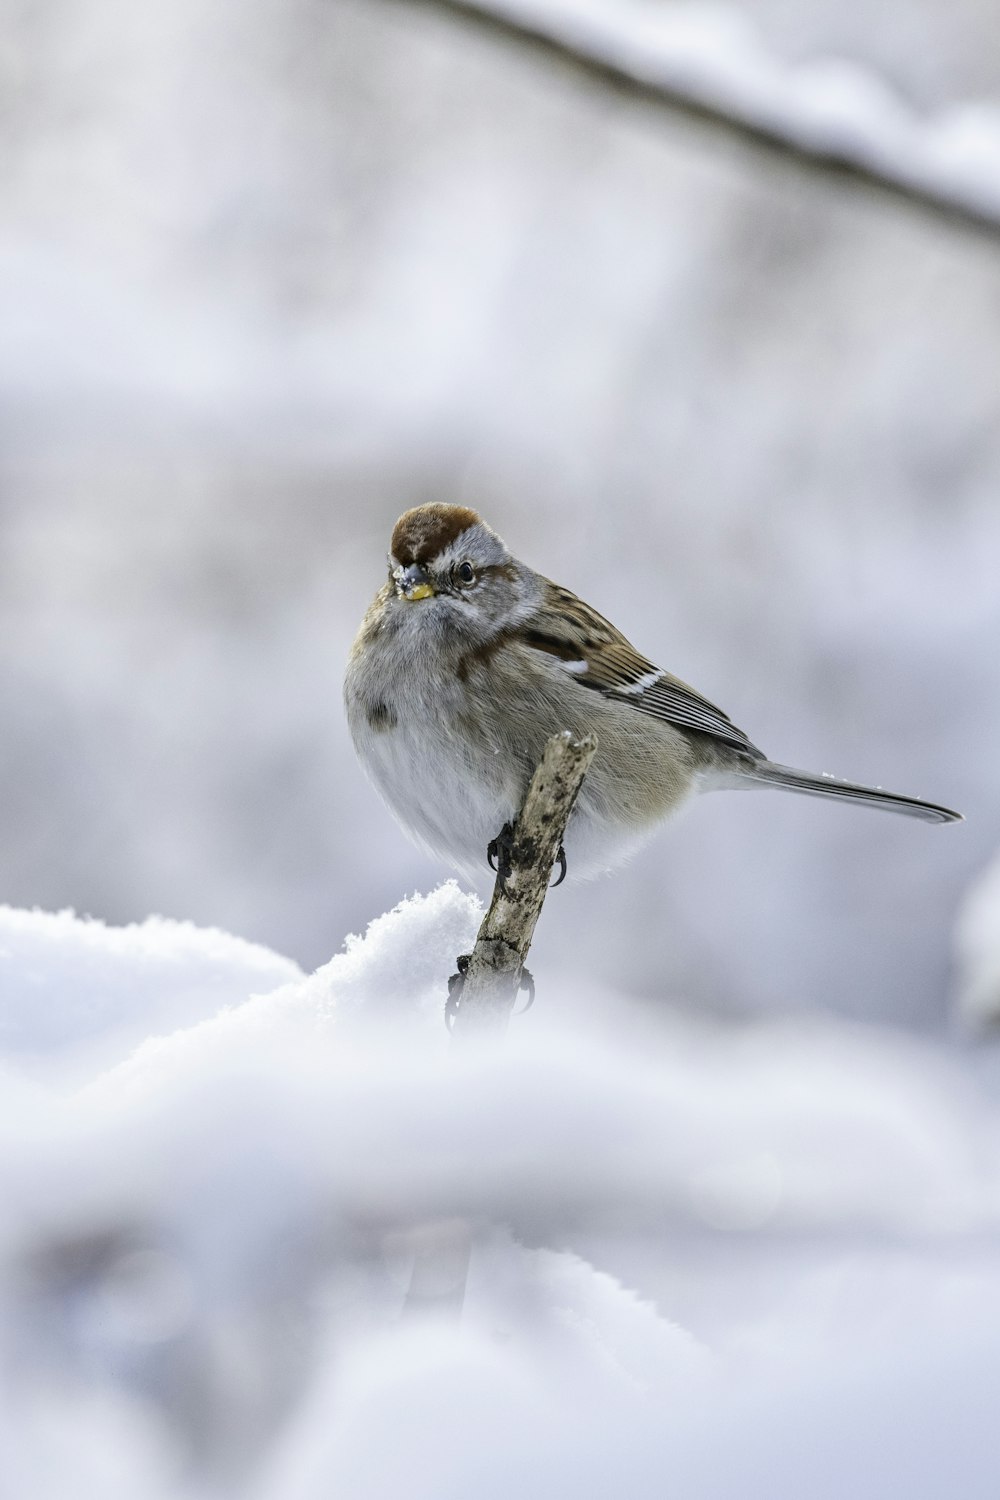 a small bird perched on a branch in the snow